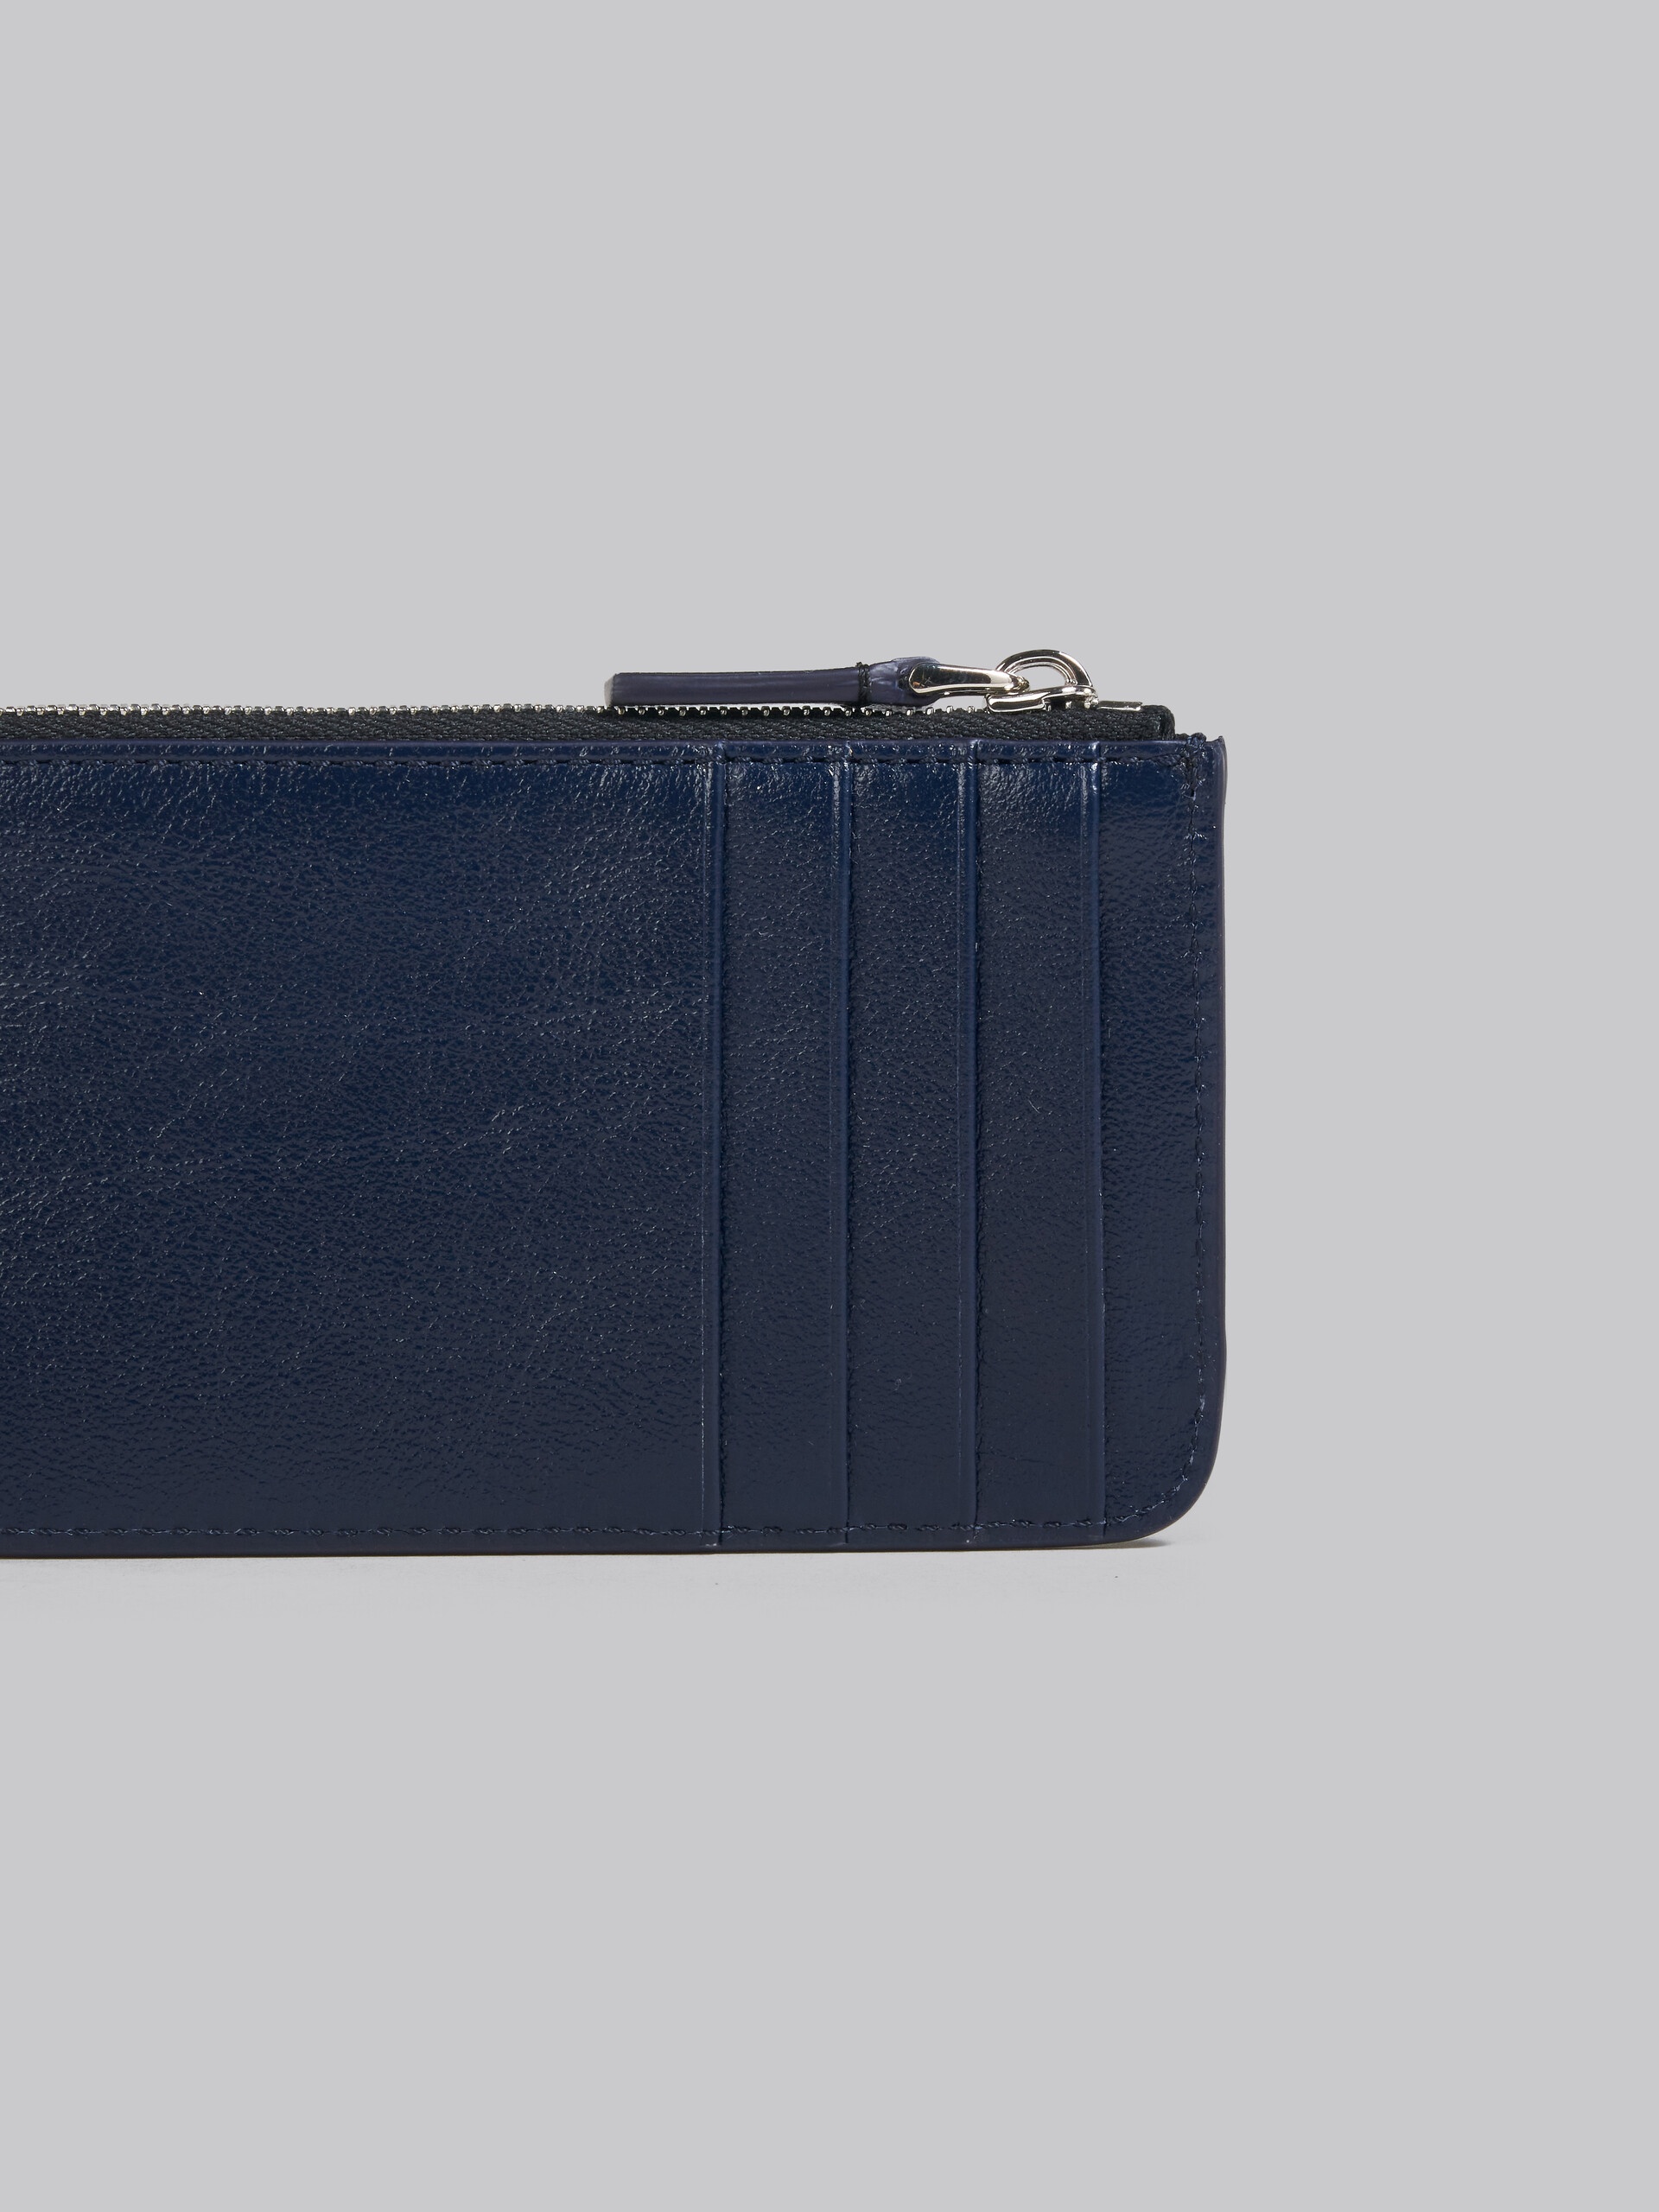 NAVY BLUE AND BLACK LEATHER CARD CASE - 4